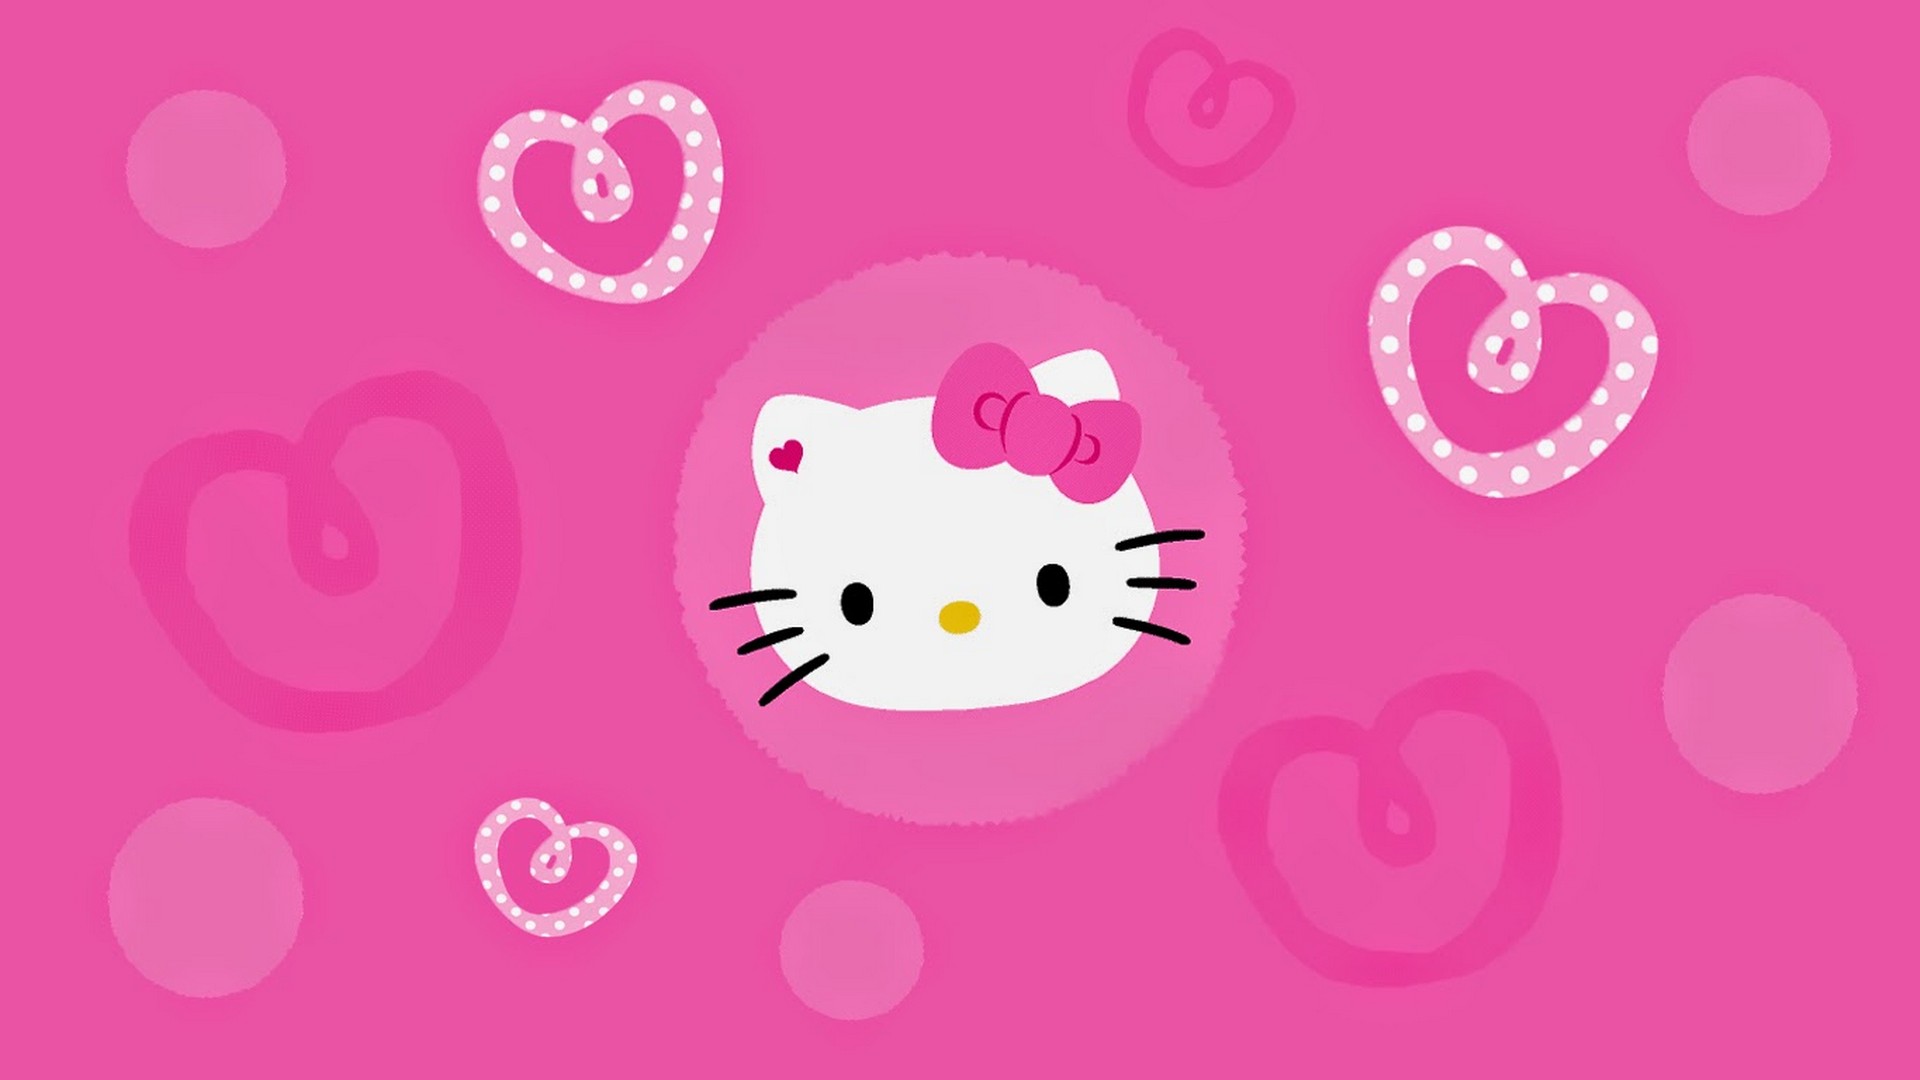 Hello Kitty Pictures Desktop Wallpaper with resolution 1920X1080 pixel. You can use this wallpaper as background for your desktop Computer Screensavers, Android or iPhone smartphones